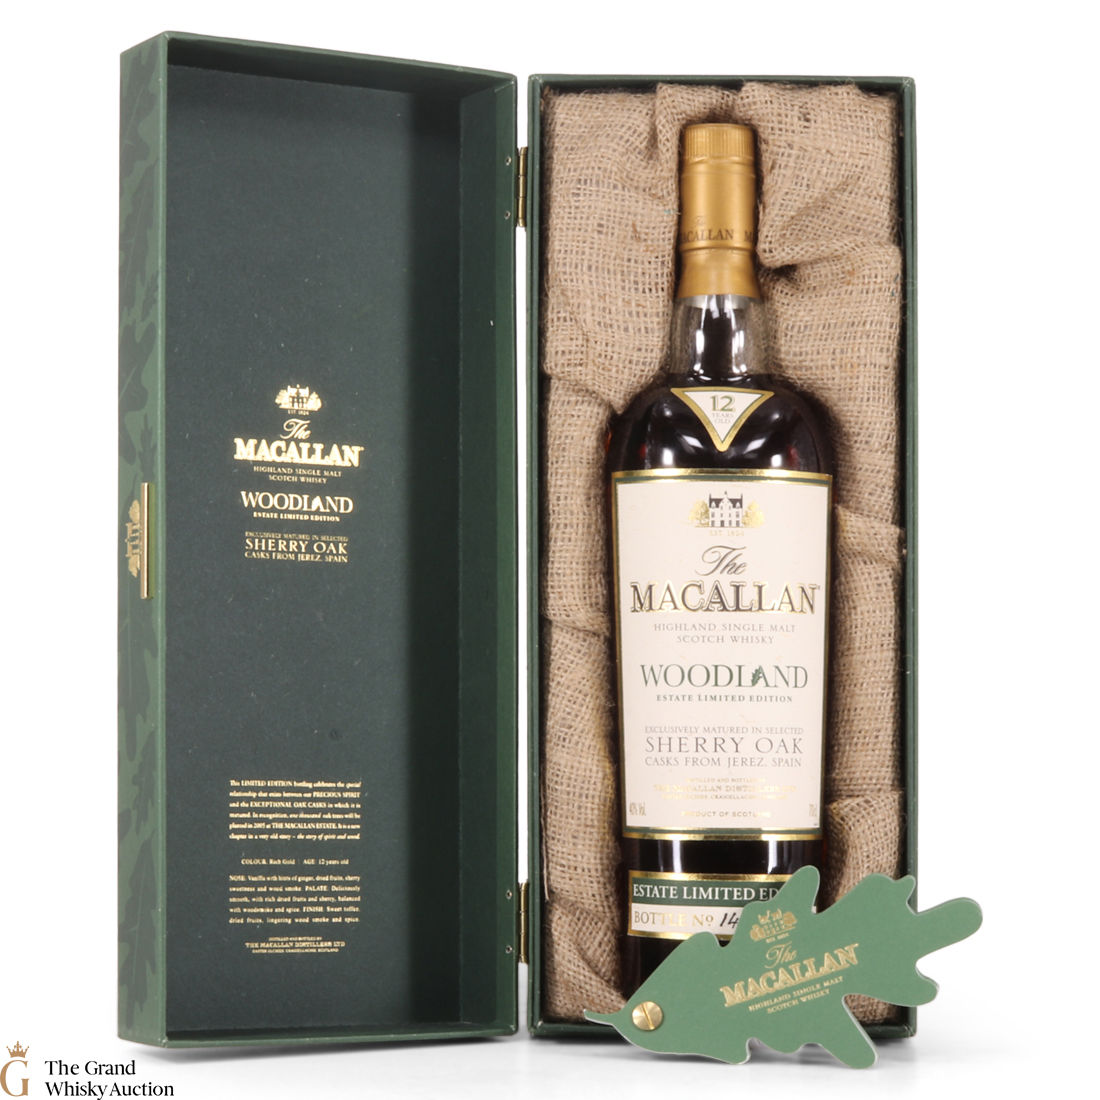 Macallan 12 Year Old Woodland Estate Limited Edition Auction The Grand Whisky Auction